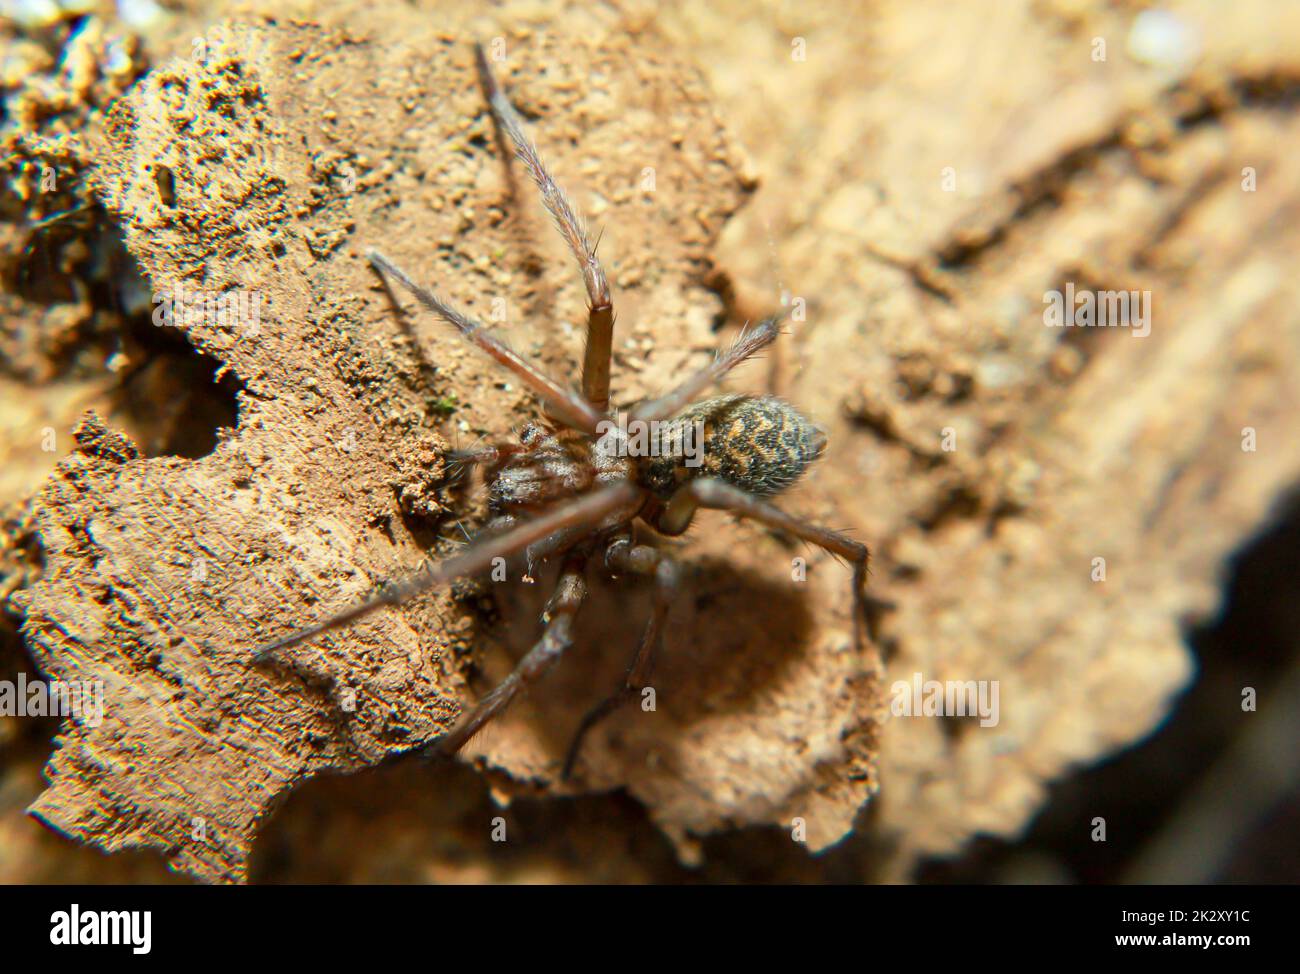 A close-up of a large angle spider. It belongs to the funnel-web spiders (Agelenidae). Stock Photo